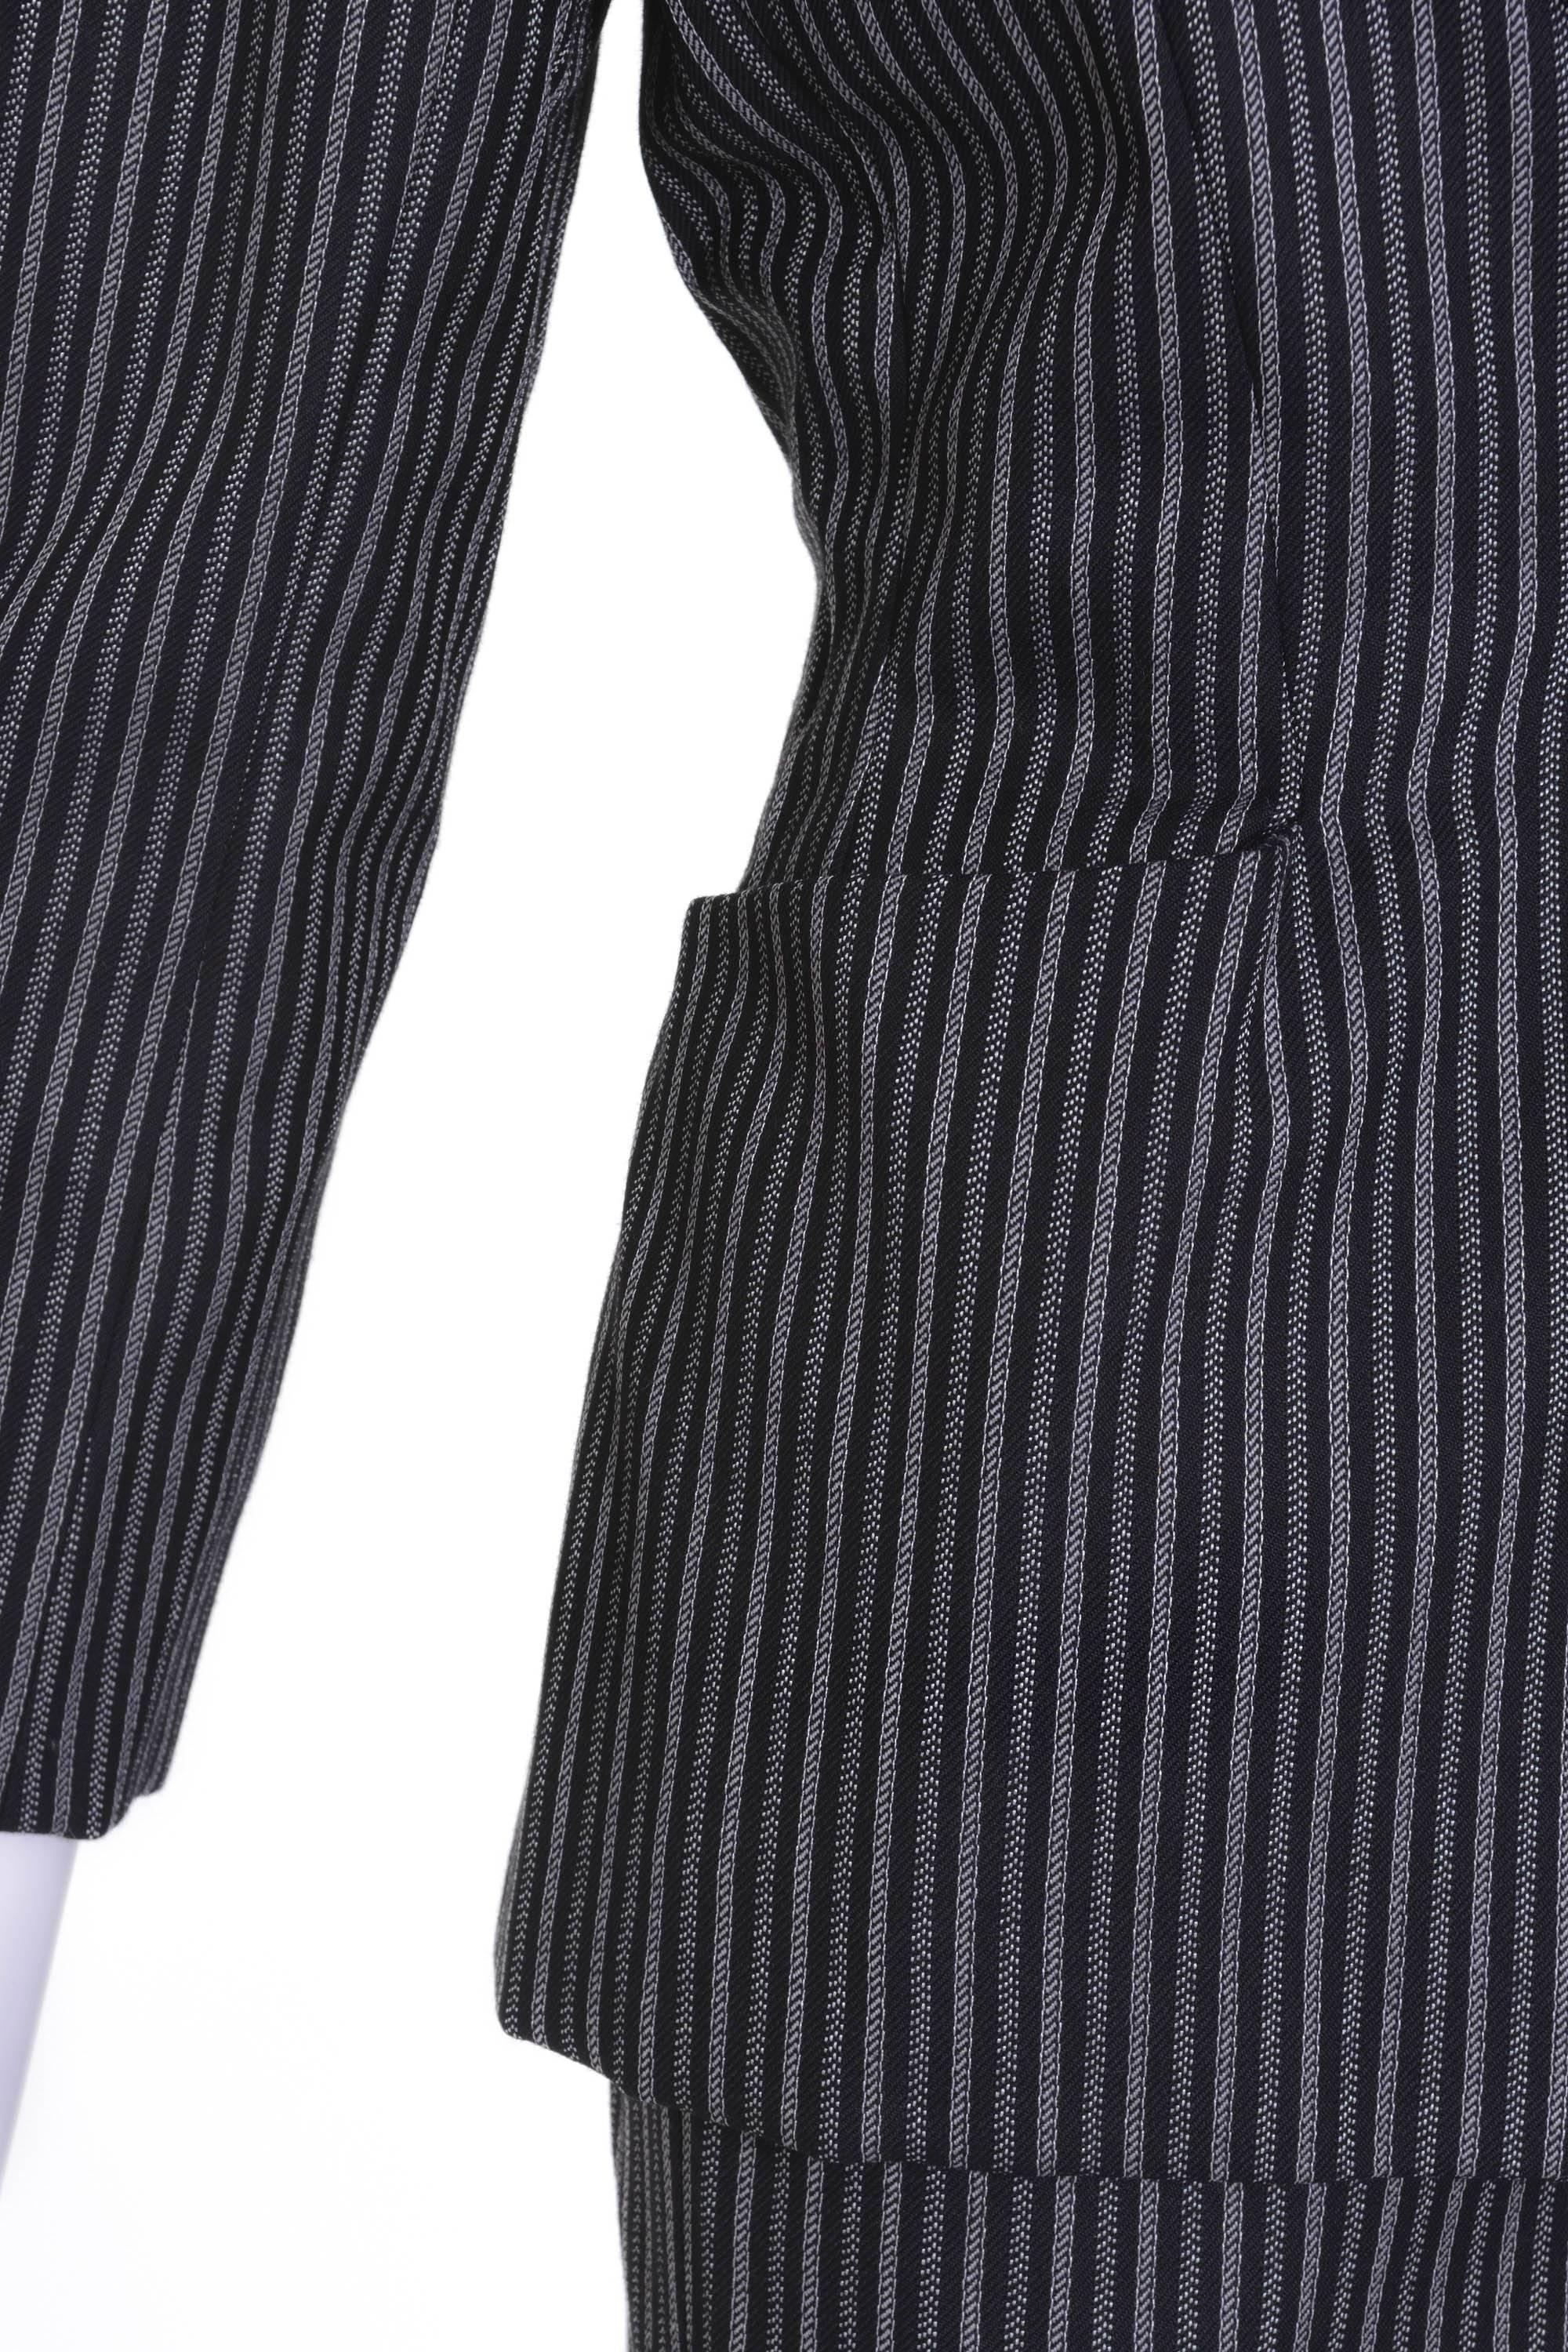 1980s YVES SAiNT LAURENT Rive Gauche Pinstriped Wool Suit Skirt  In Excellent Condition For Sale In Milan, Italy